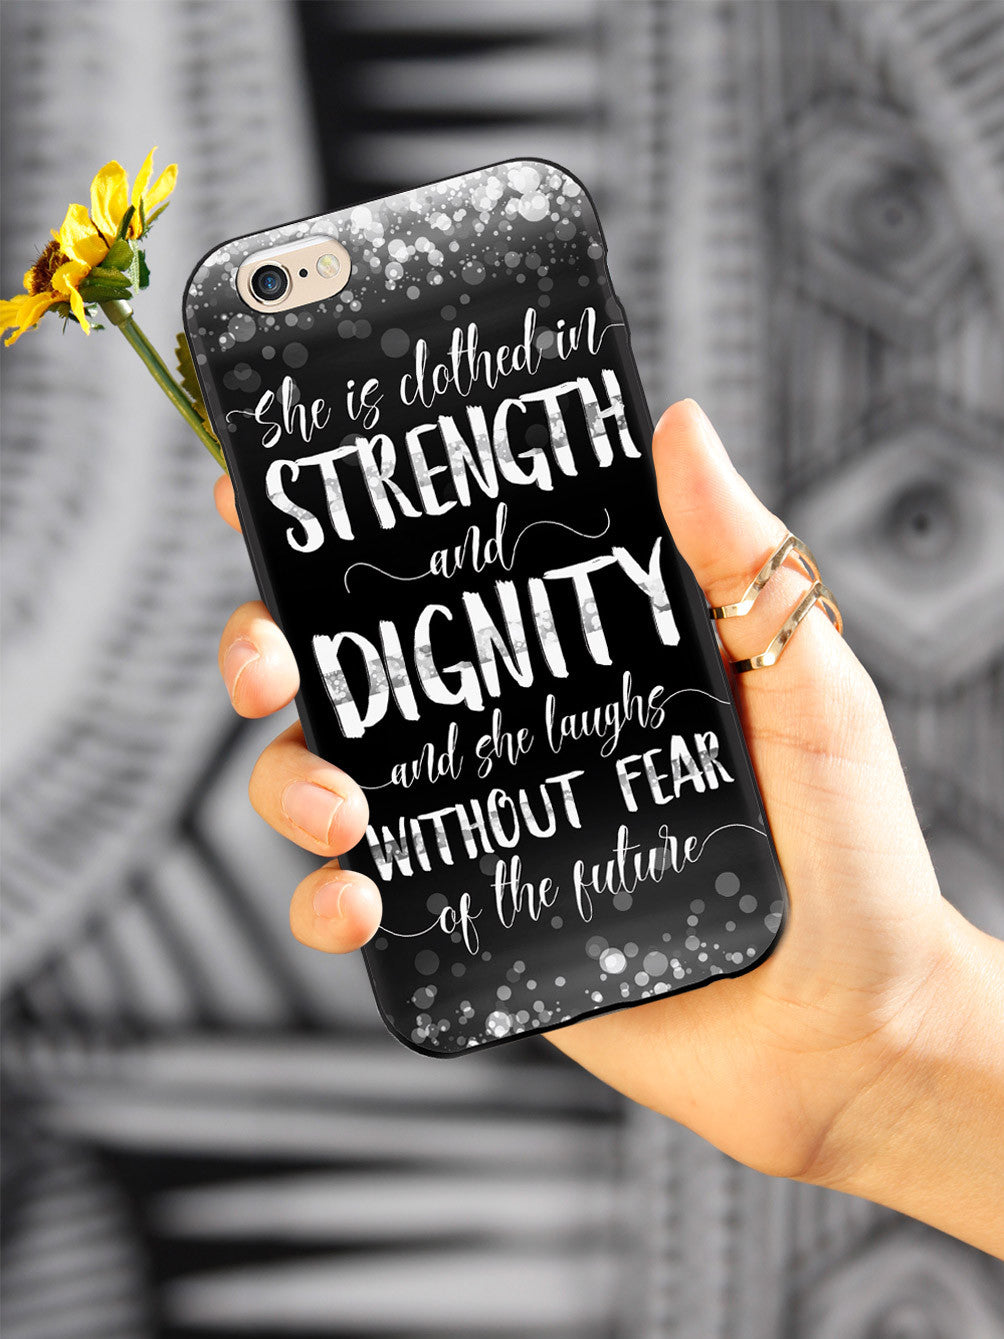 She Is Clothed in Strength and Dignity - Thin White Line Case